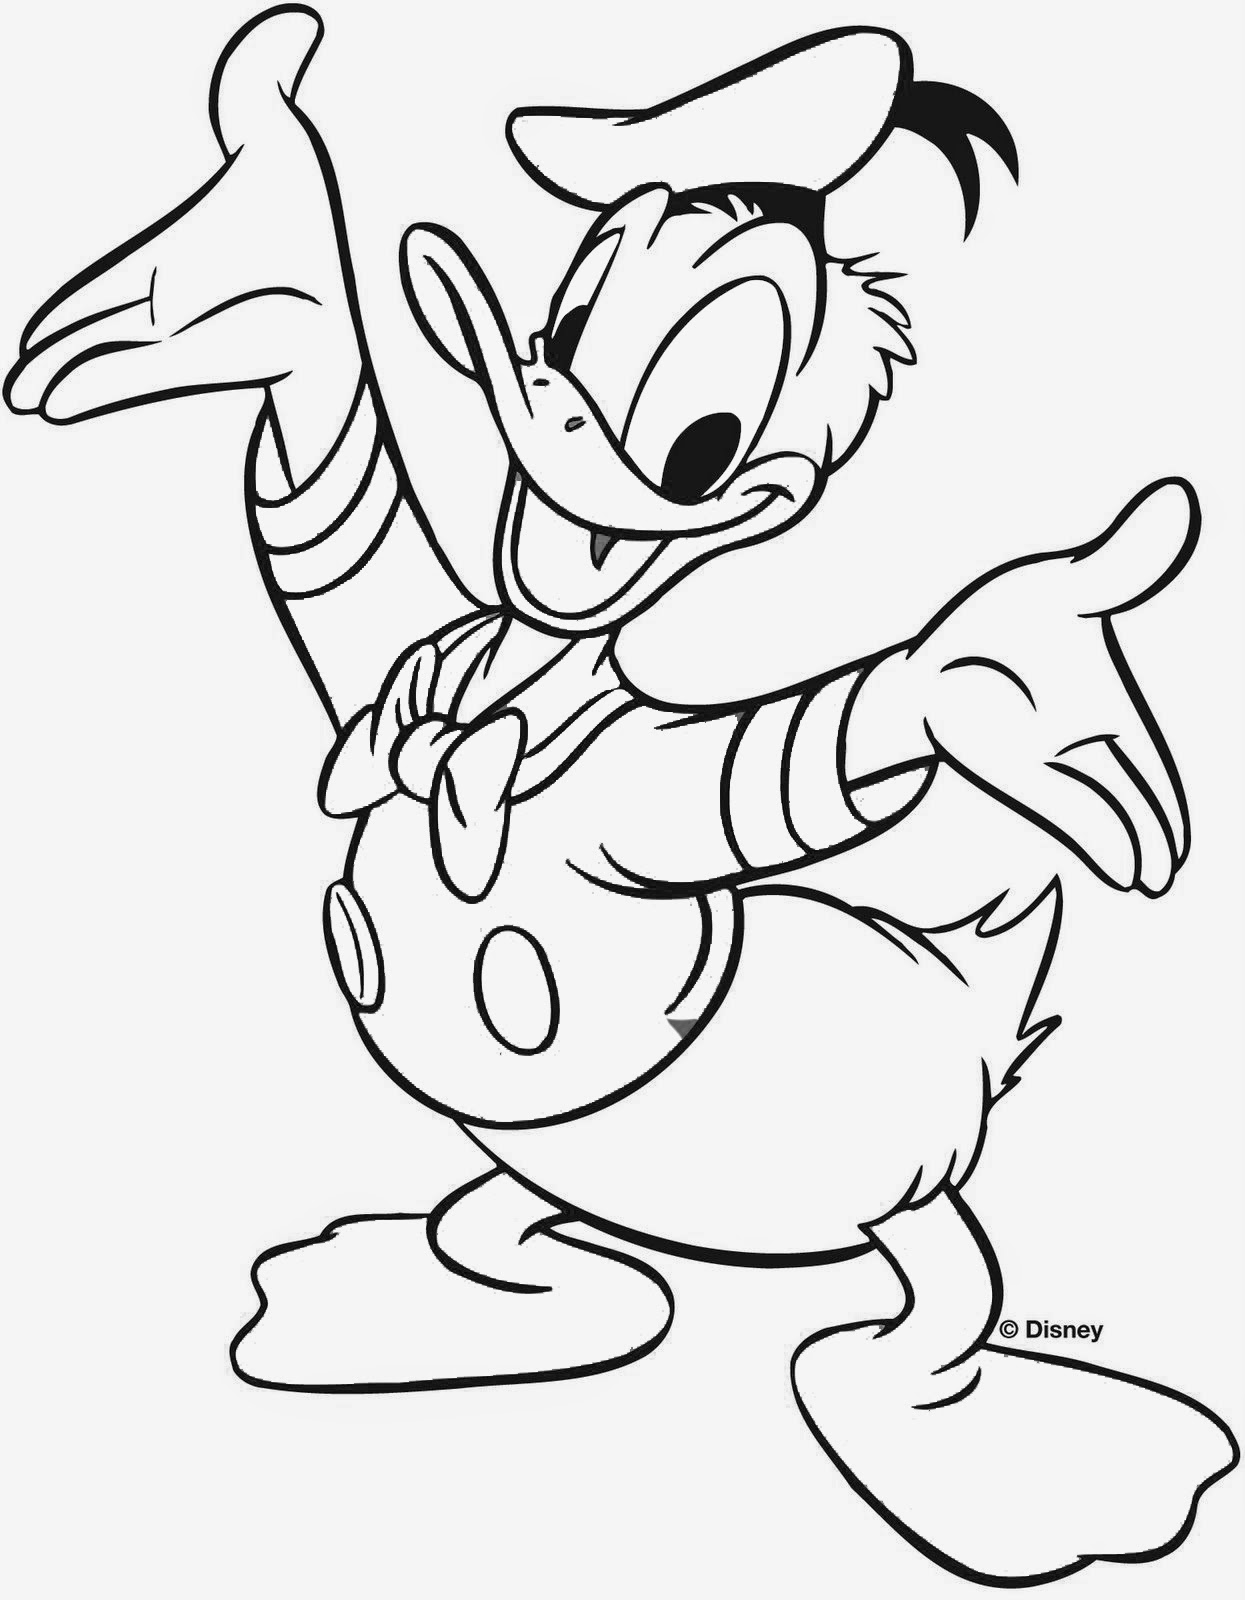 Download Coloring Blog for Kids: Donald Duck Coloring pages